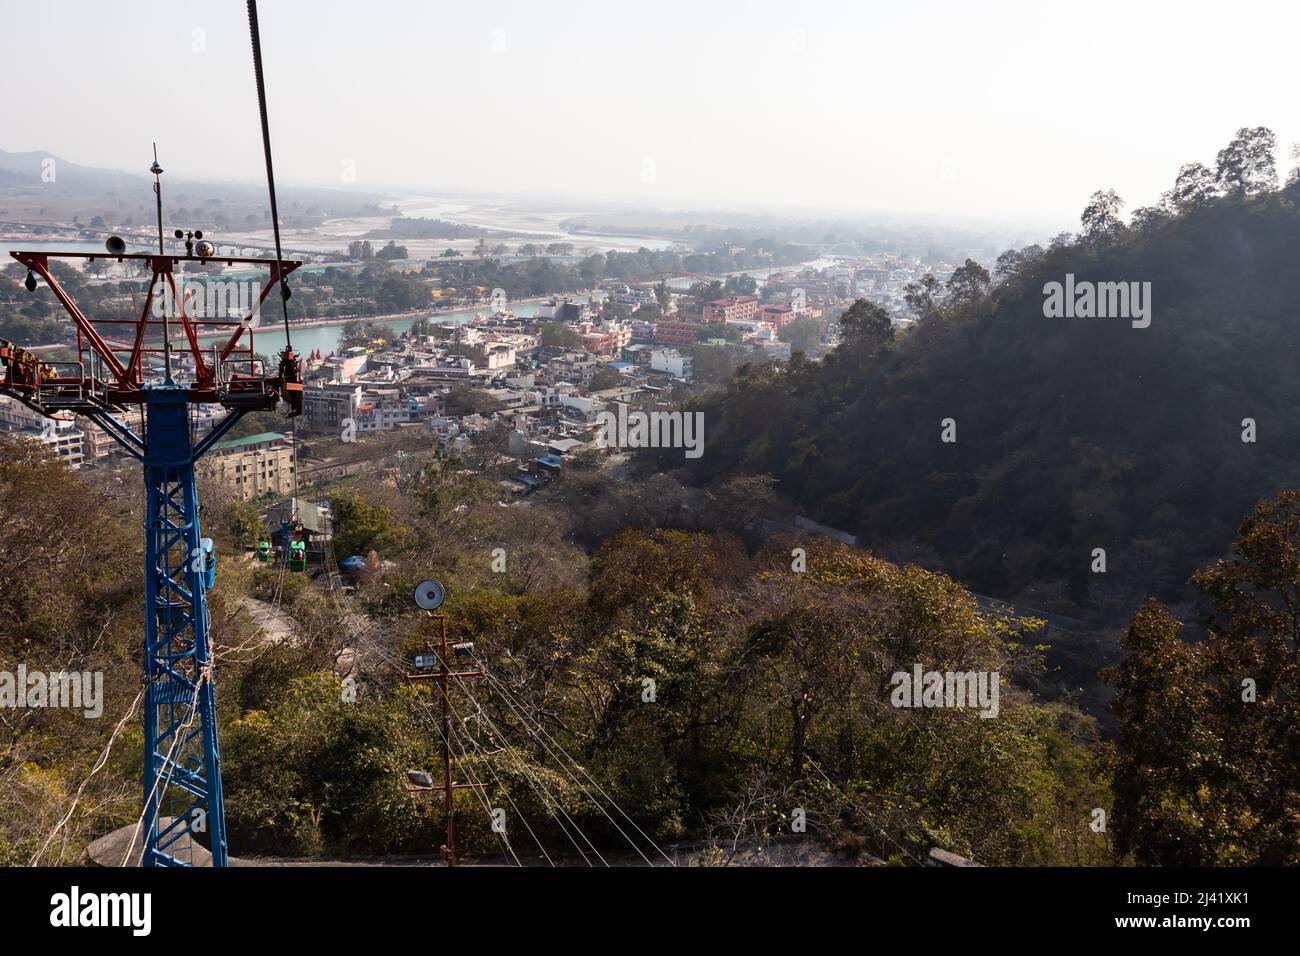 rope way with city view at day from top angle image is taken at Mansa Devi Temple rope way haridwar uttrakhand india. Stock Photo